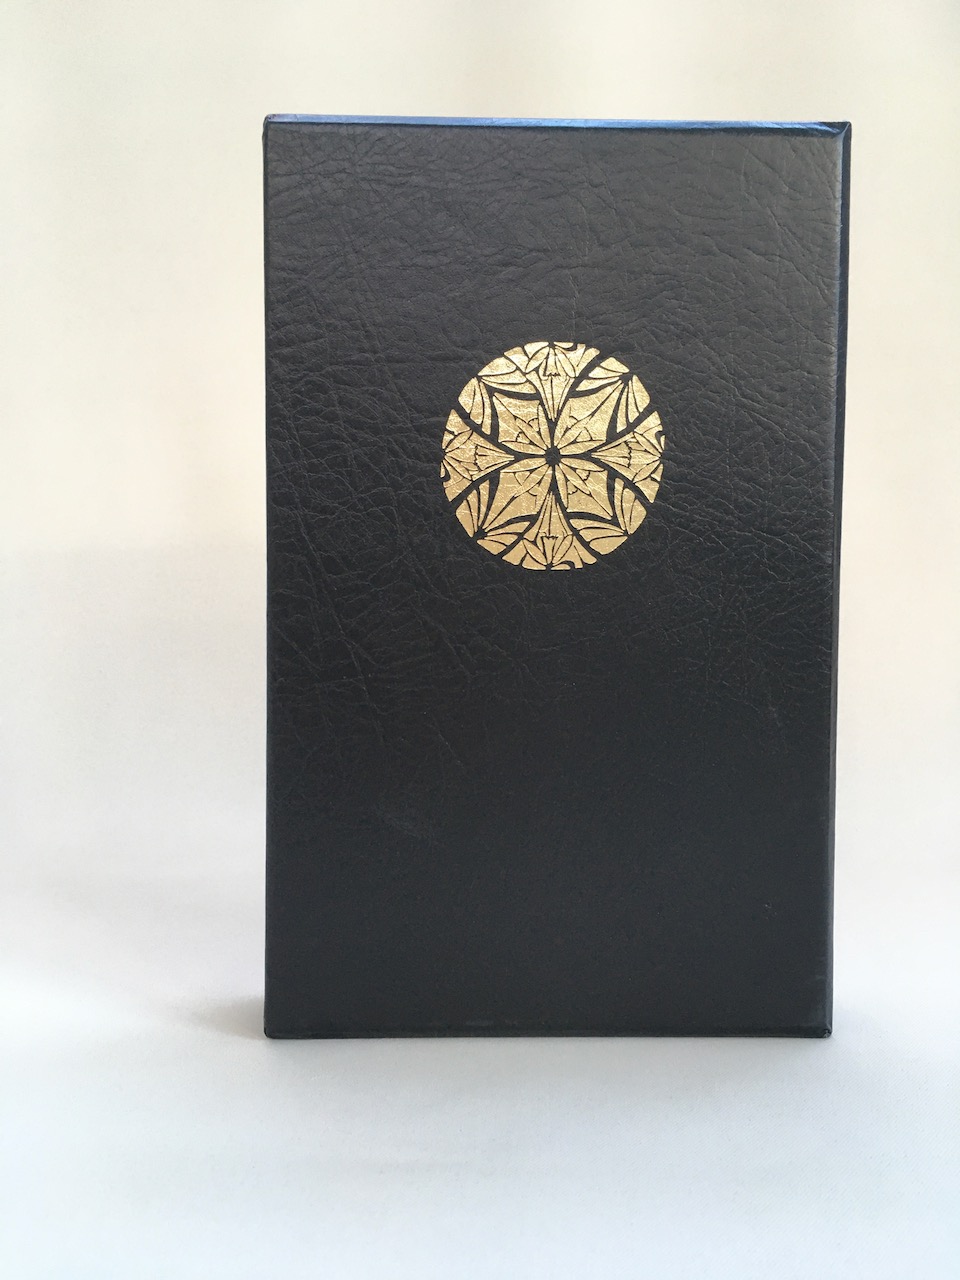 
Black Limited De Luxe edition of the Silmarillion 2002 3